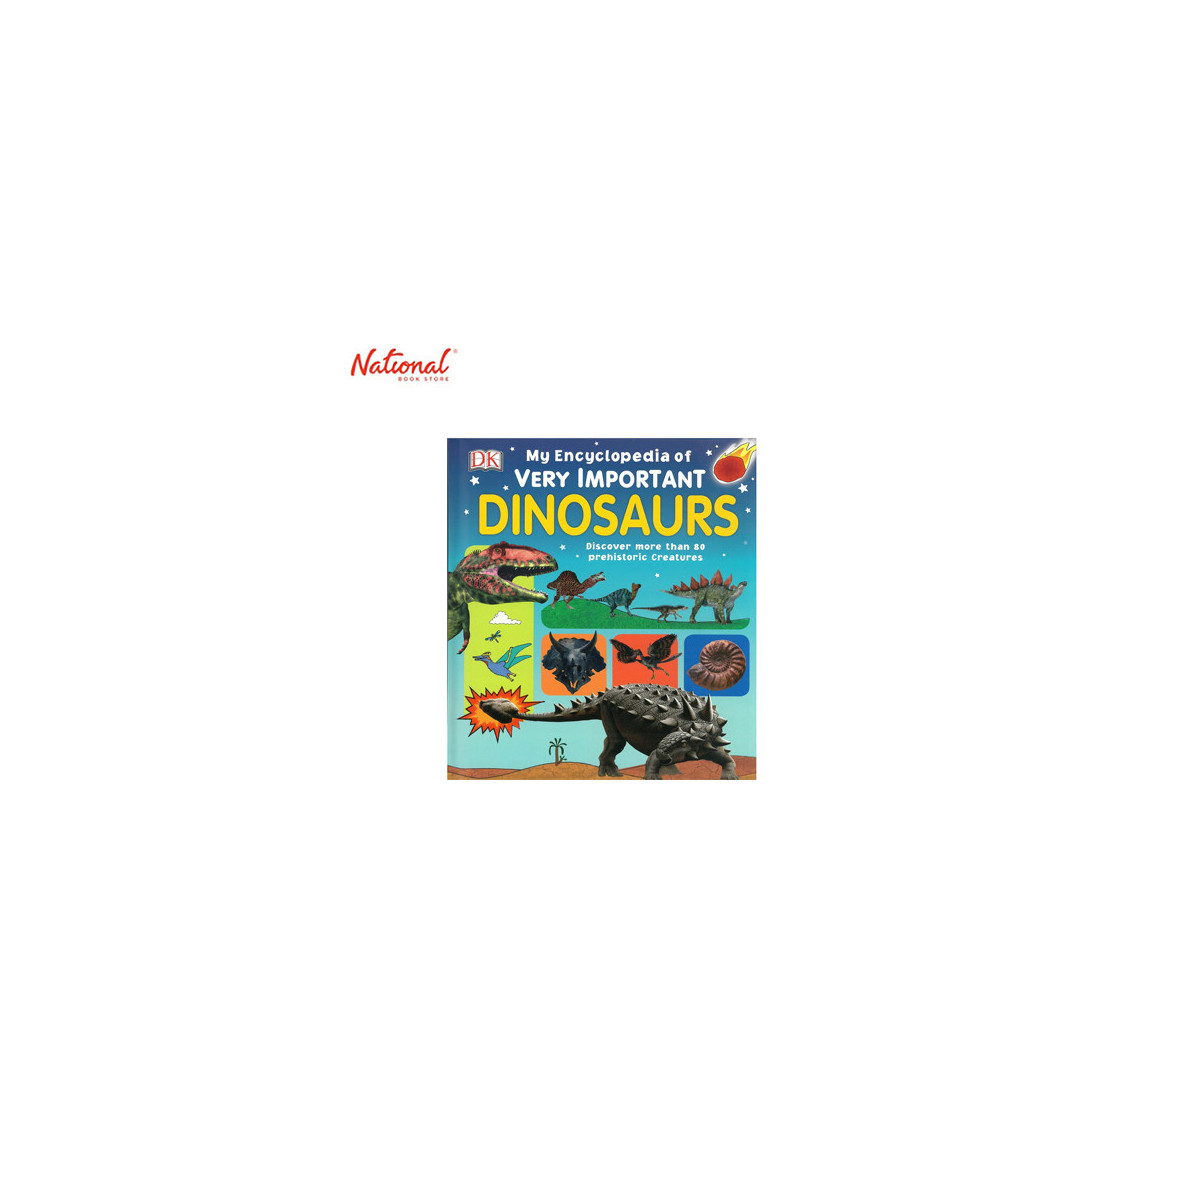 HARDCOVER　IMPORTANT　OF　ENCYCLOPEDIA　DINOSAURS　SALE　MY　VERY